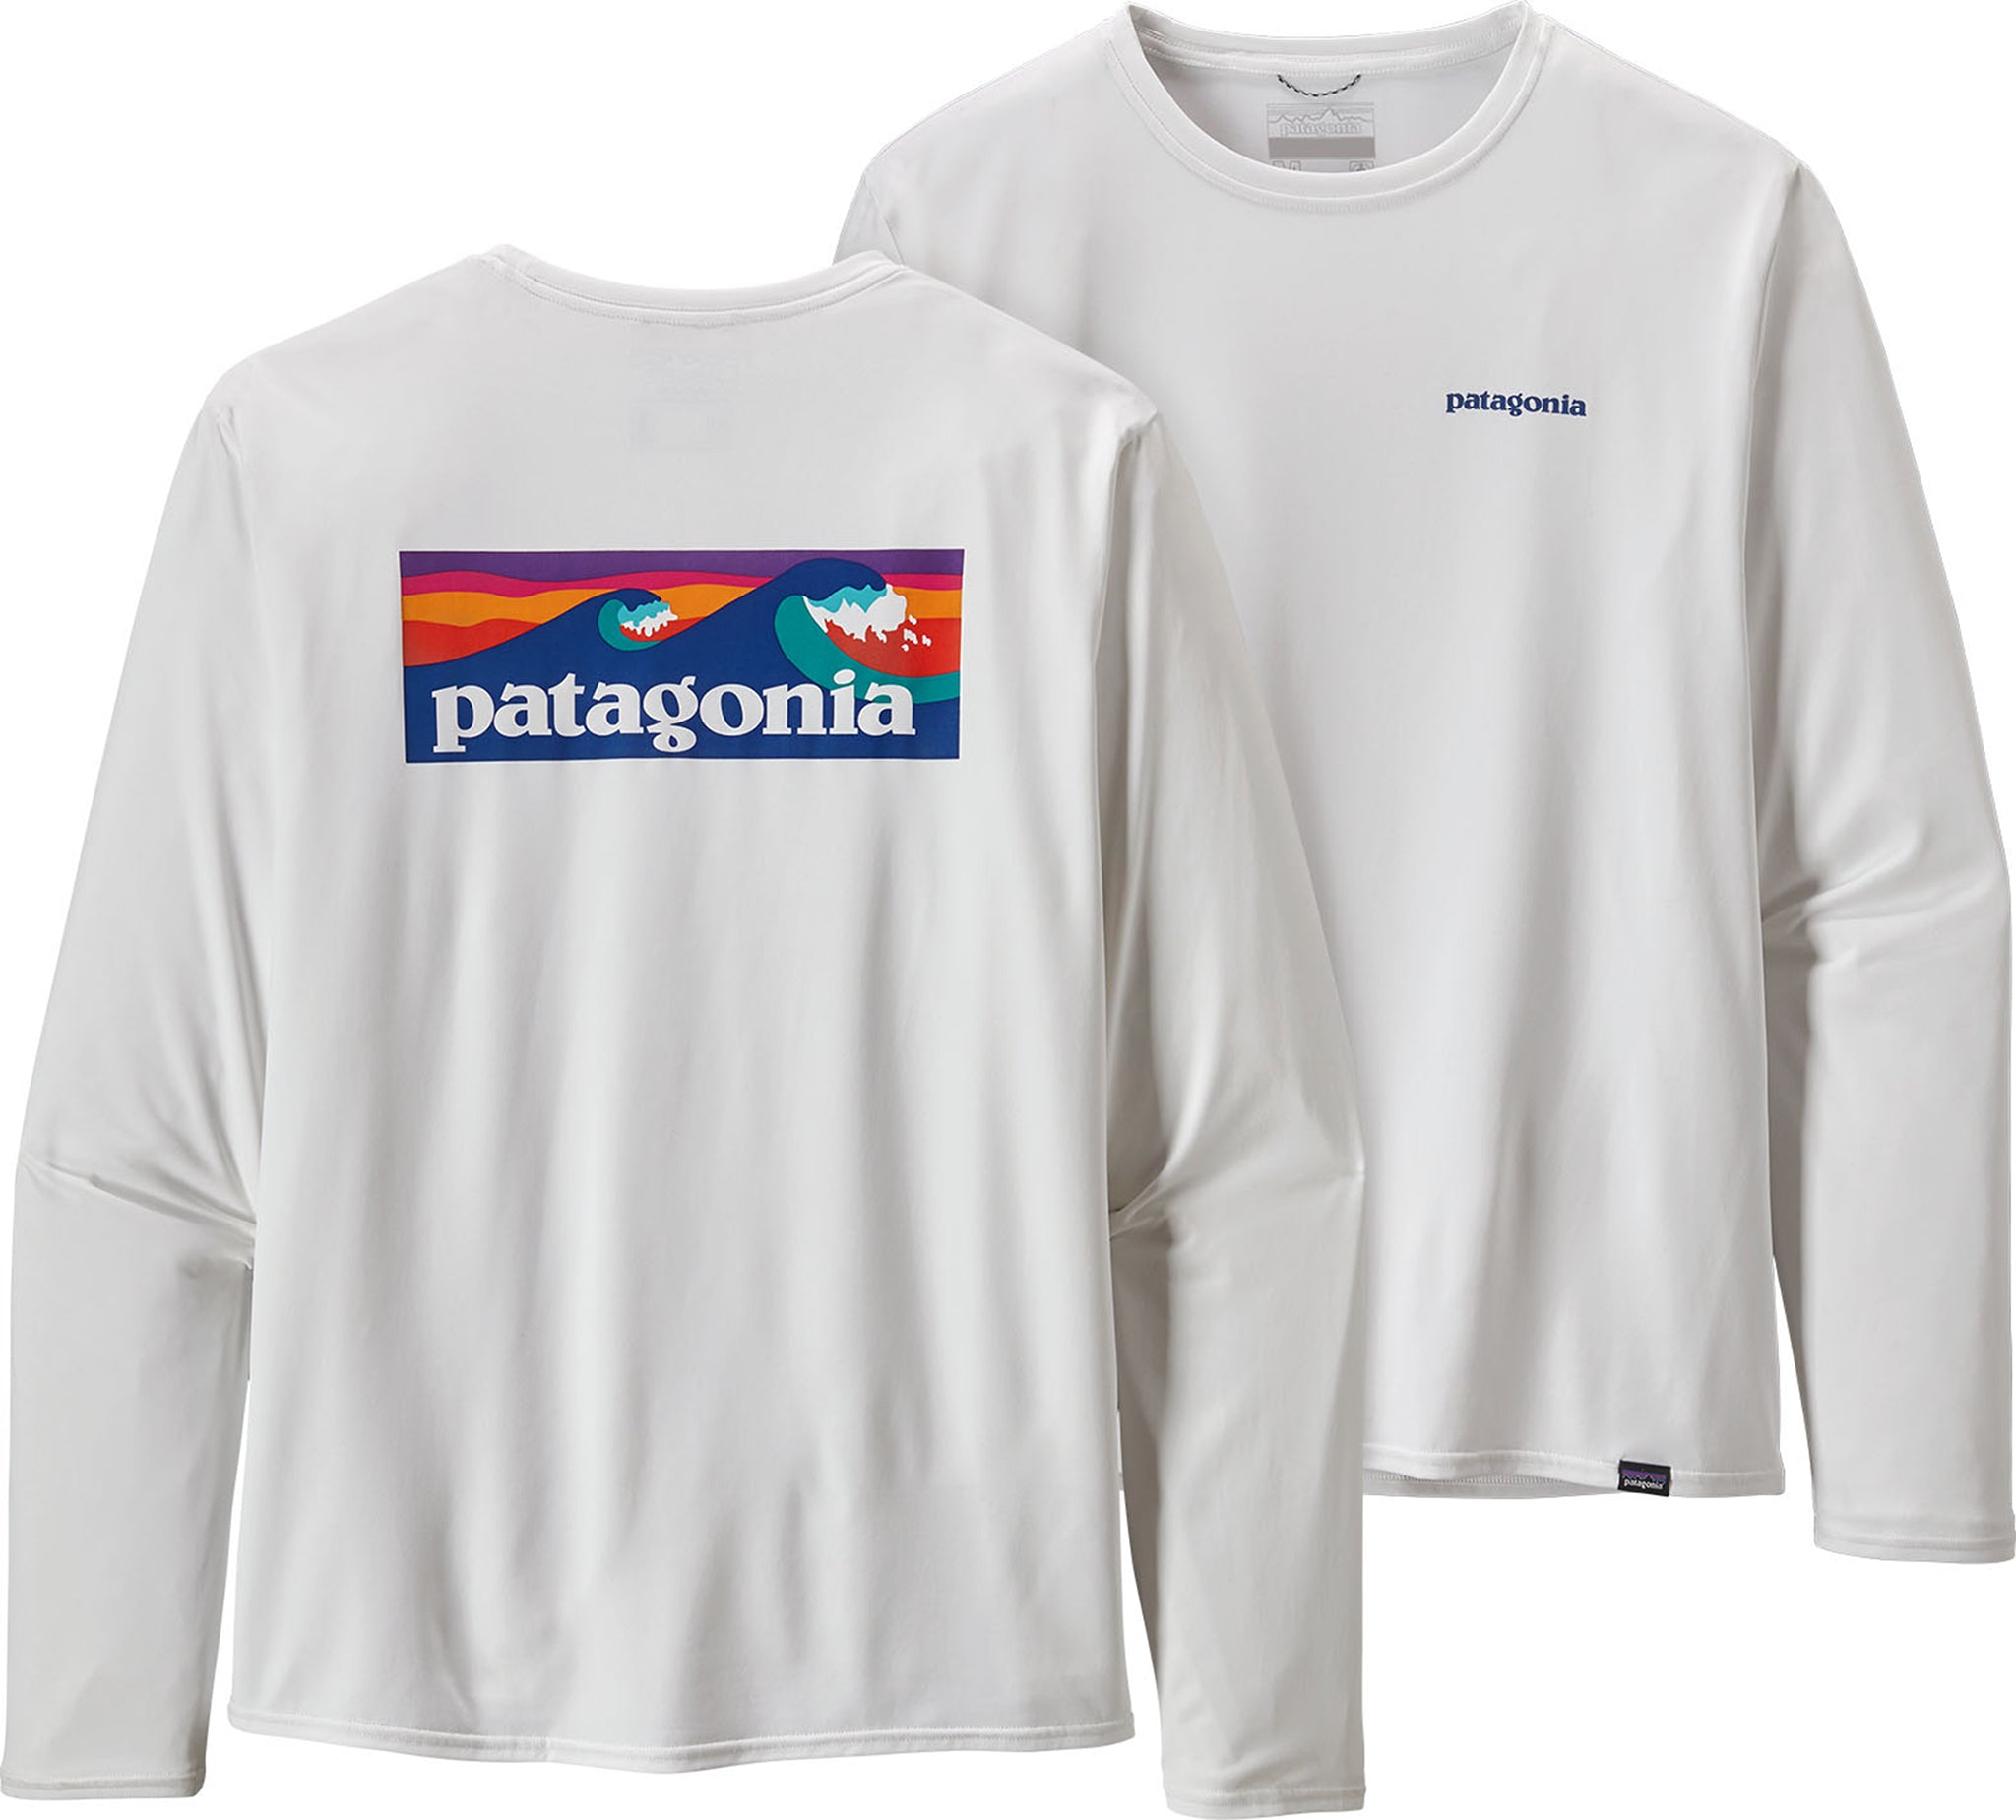 Patagonia Men's Long Sleeve T-shirt Size Small